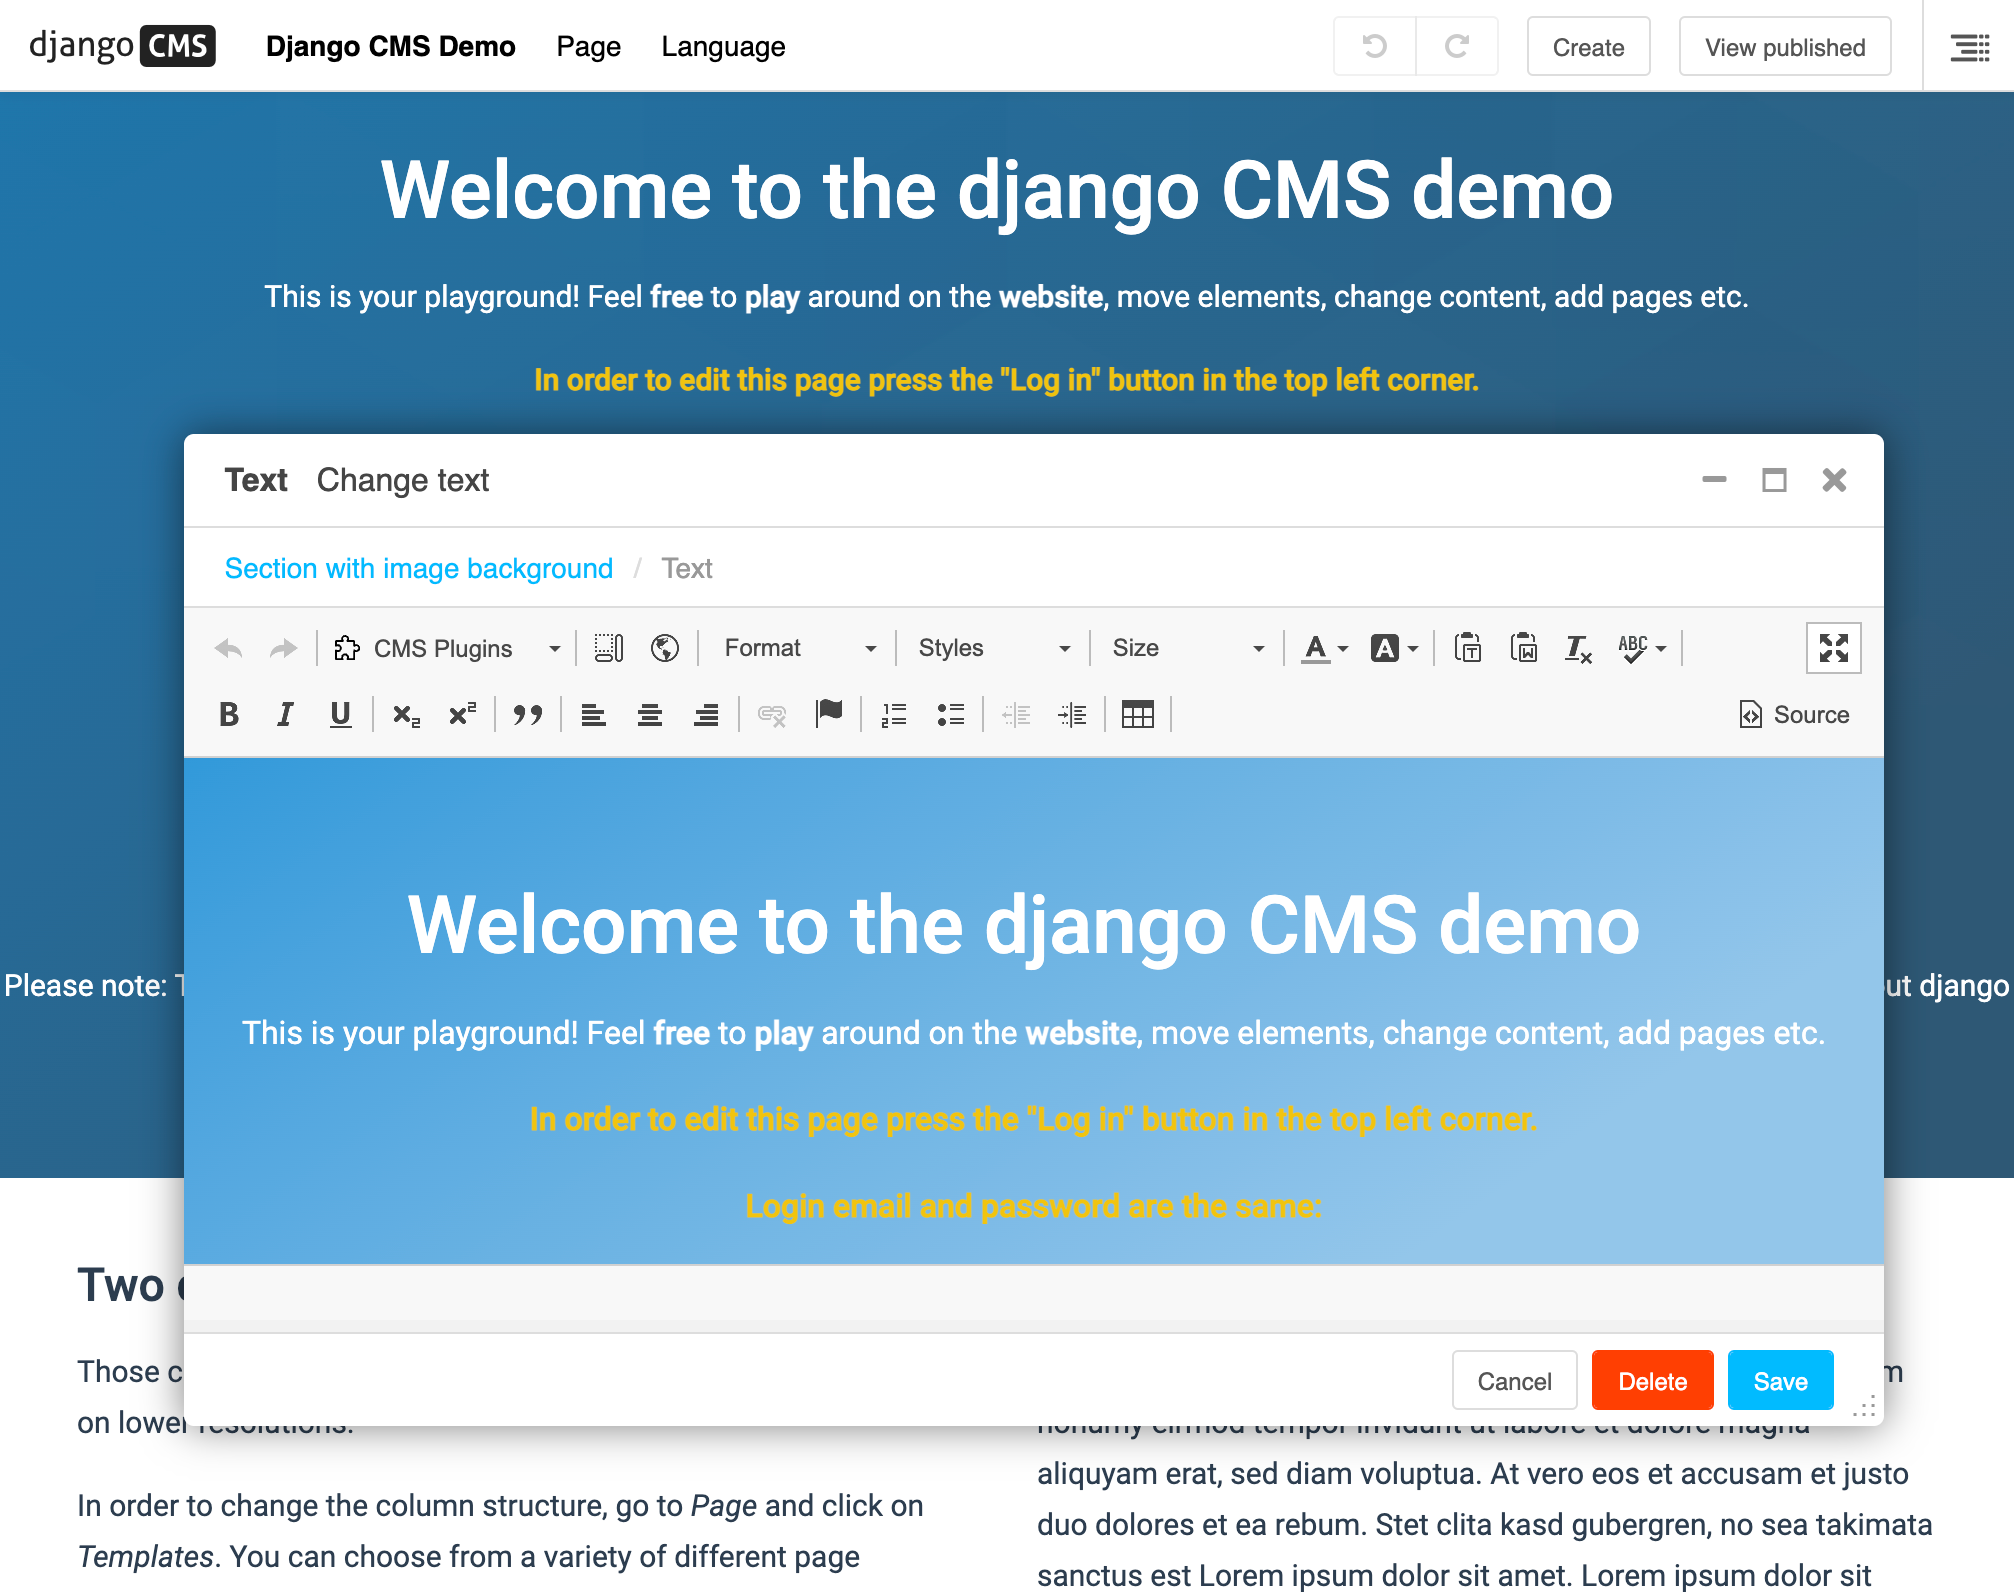 The Django CMS frontend editing experience